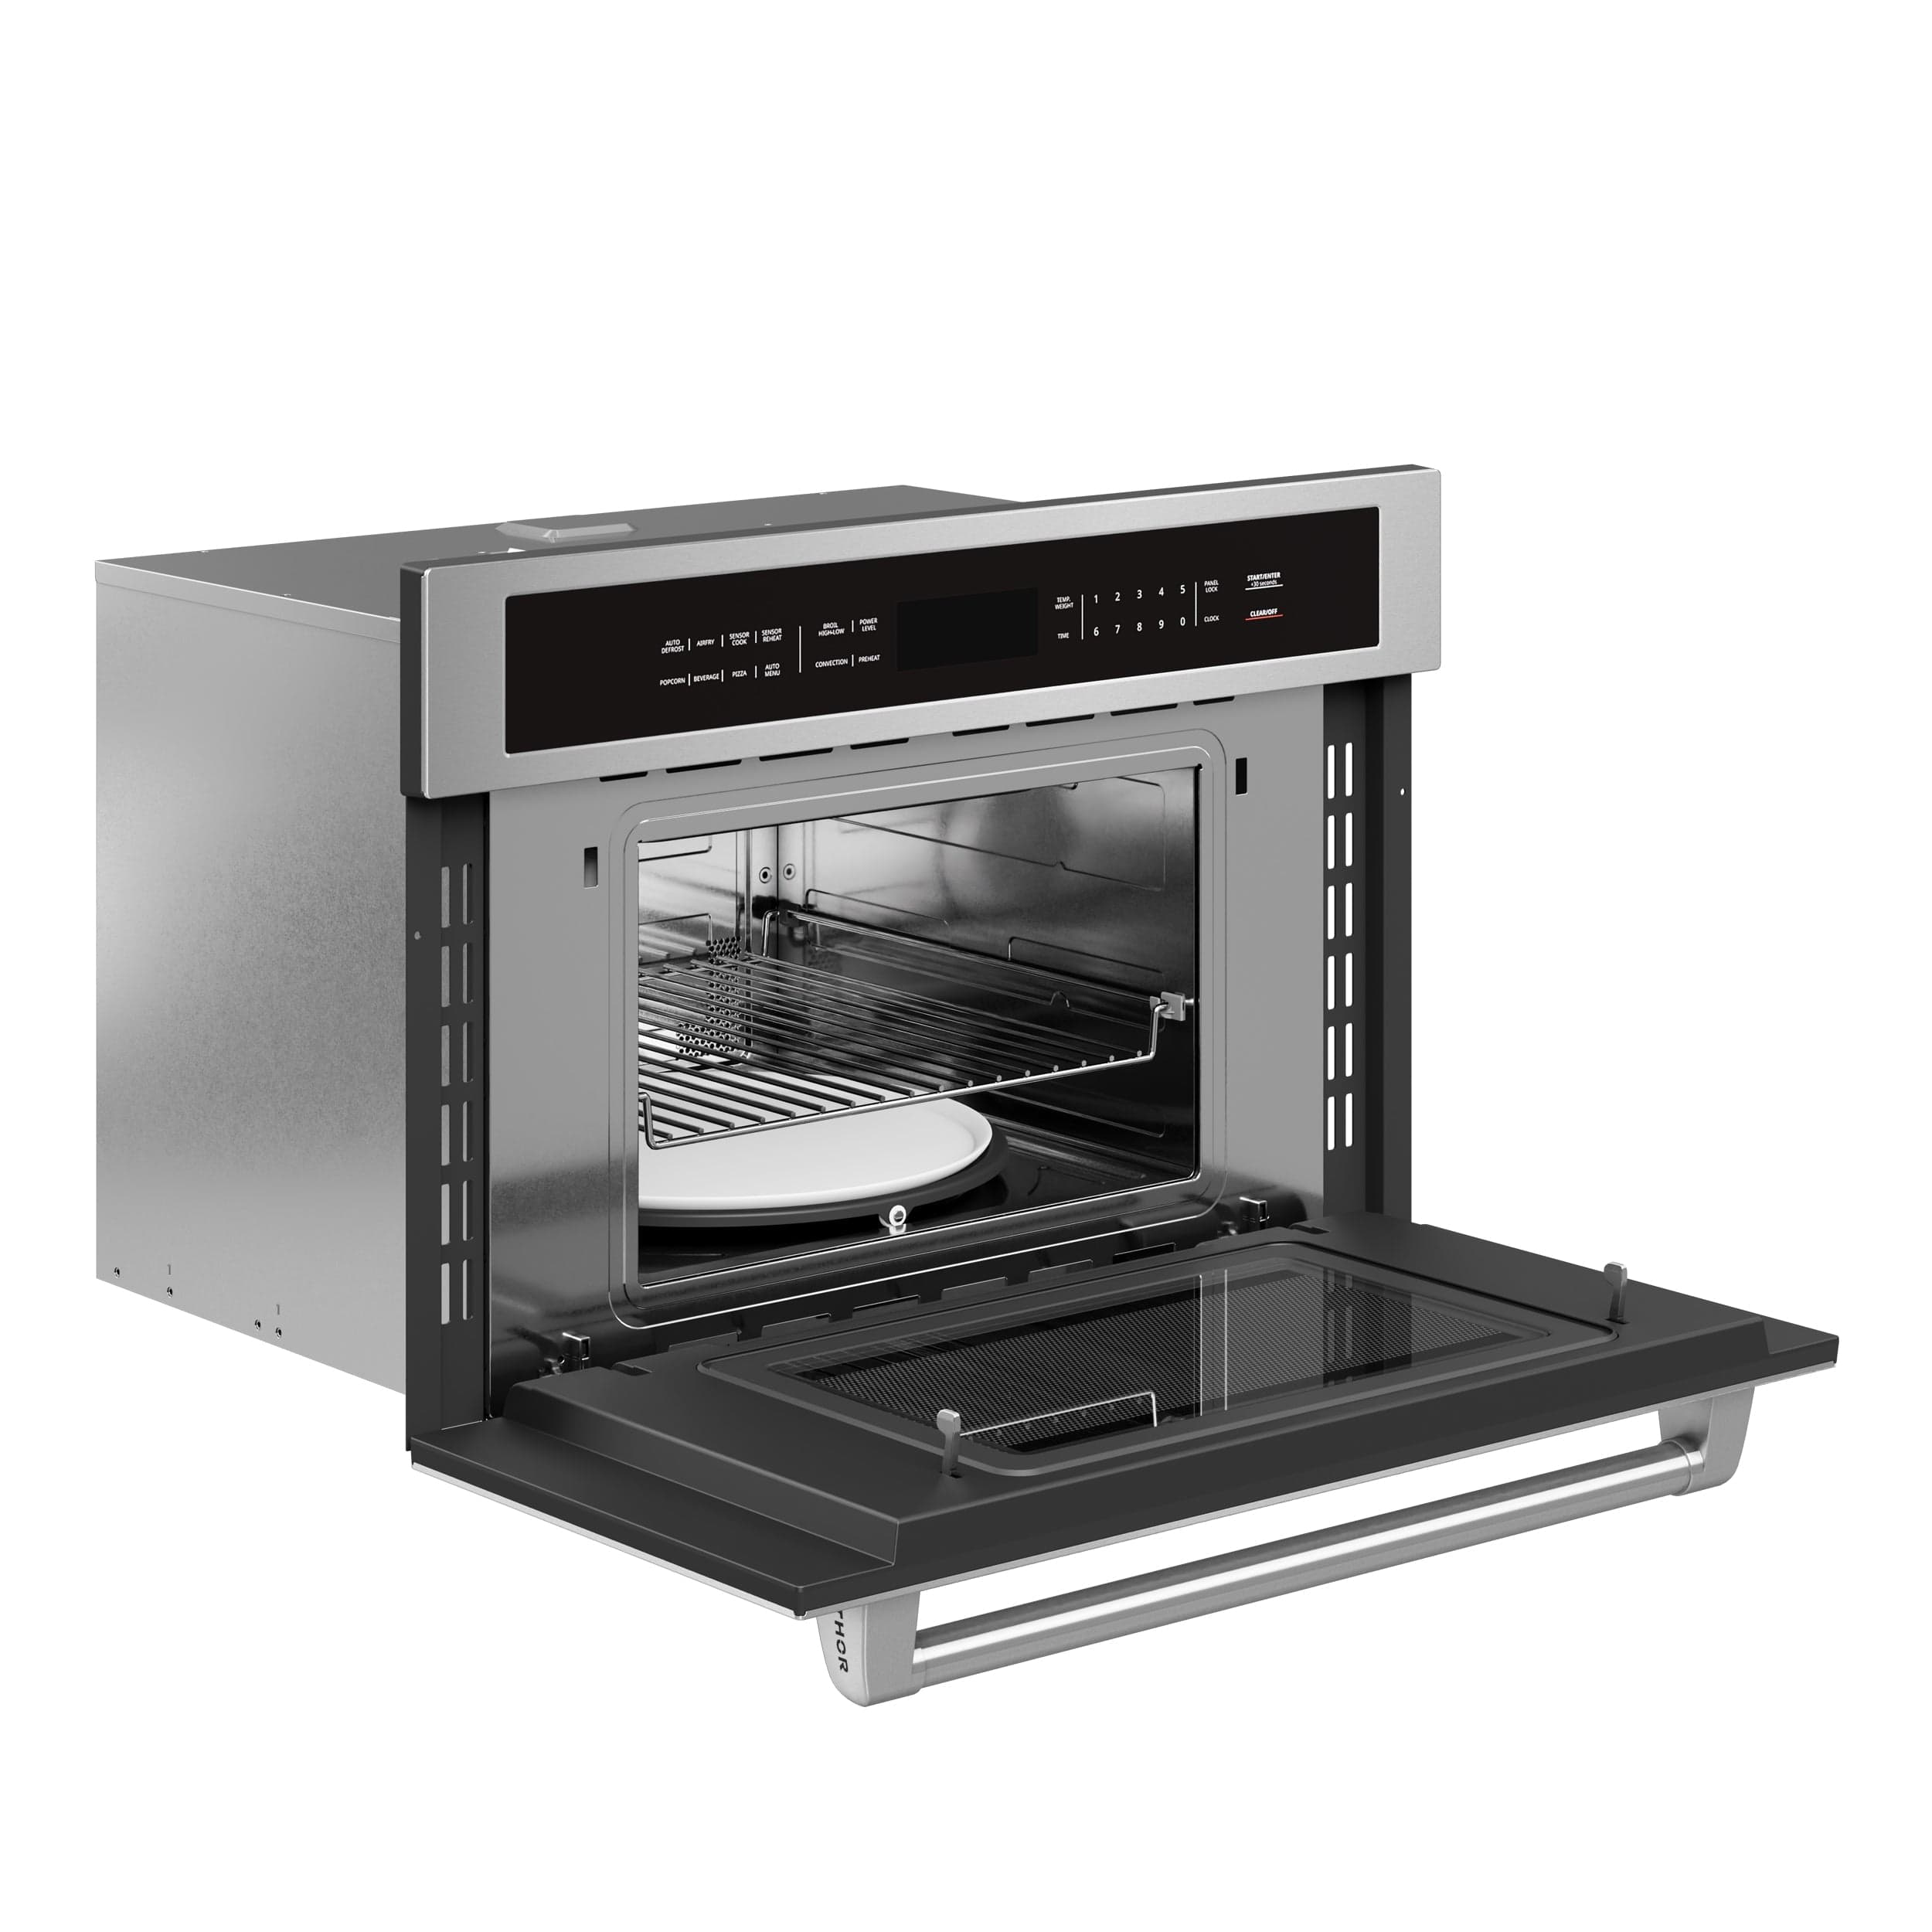 Thor Kitchen 30" Built-In Professional Microwave Speed Oven with Airfry TMO30 Microwaves TMO30 Luxury Appliances Direct